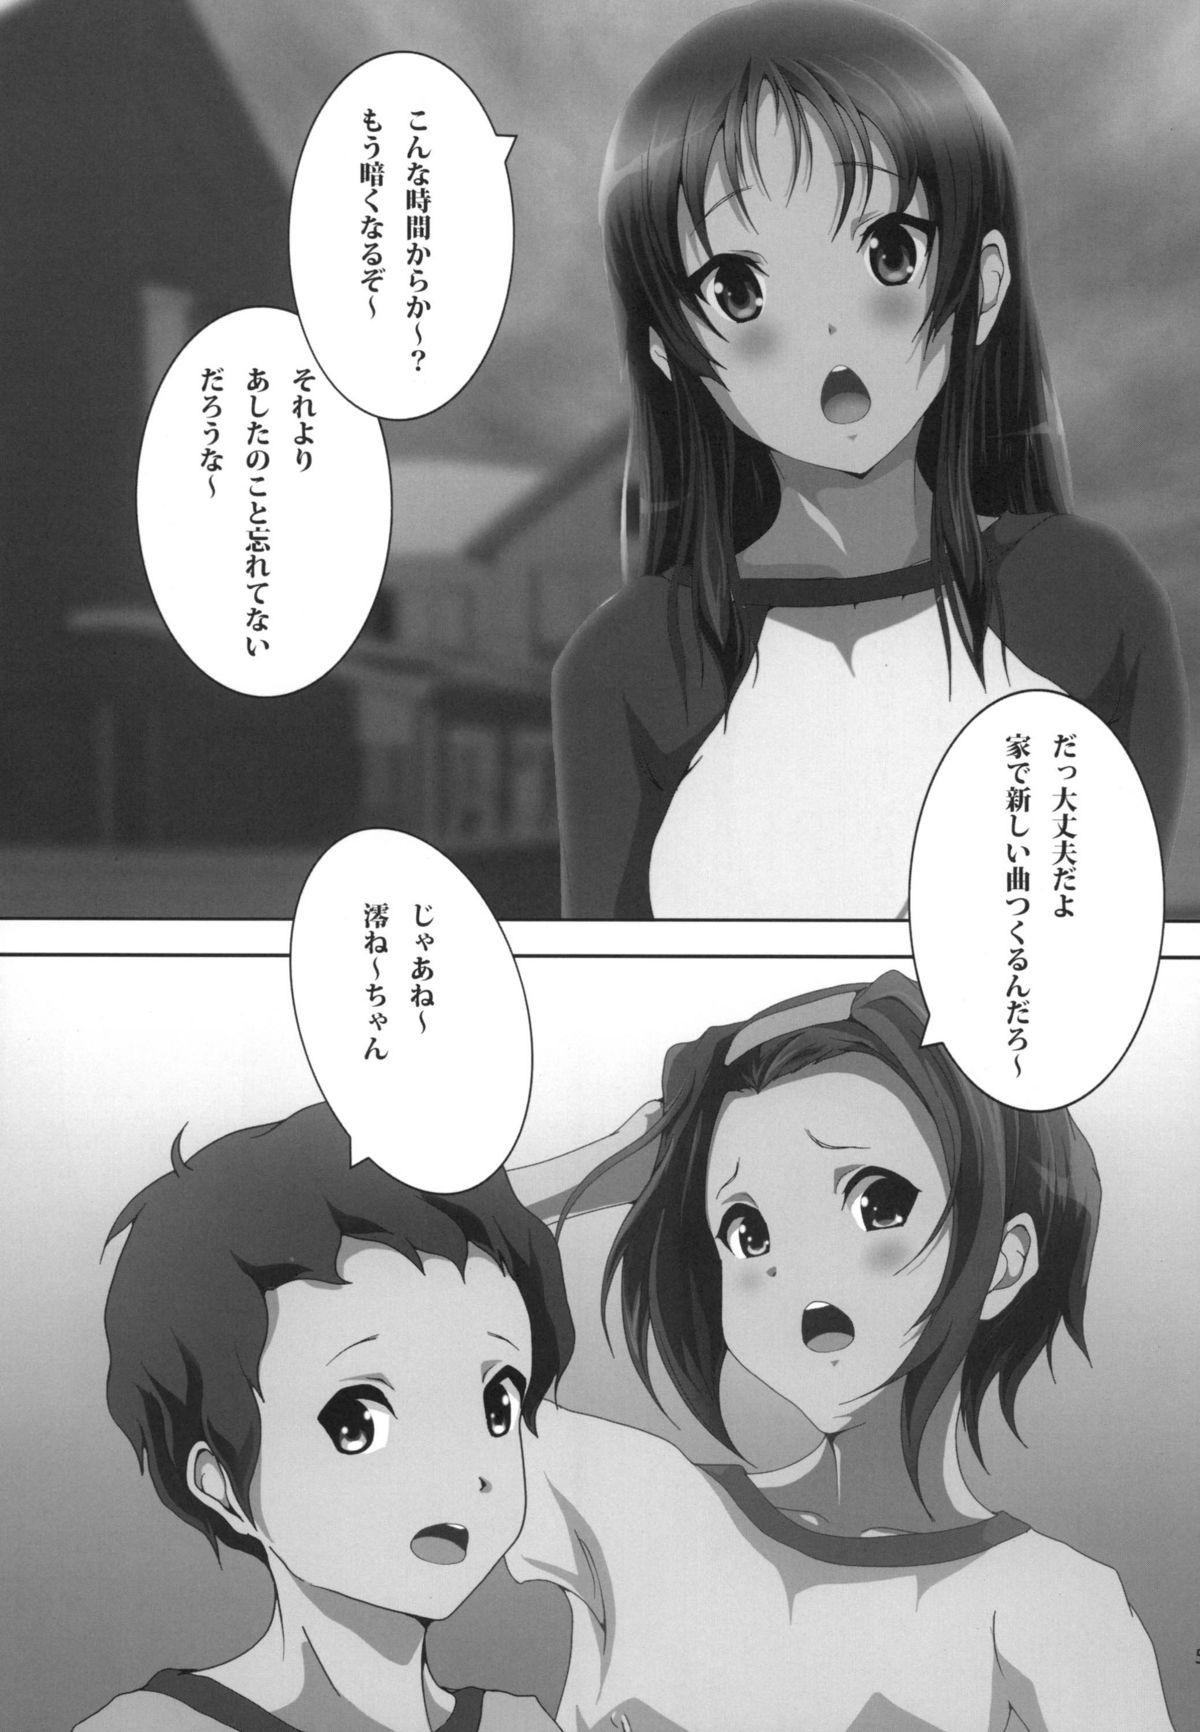 Sixtynine Mio Kan! - K-on Storyline - Page 7